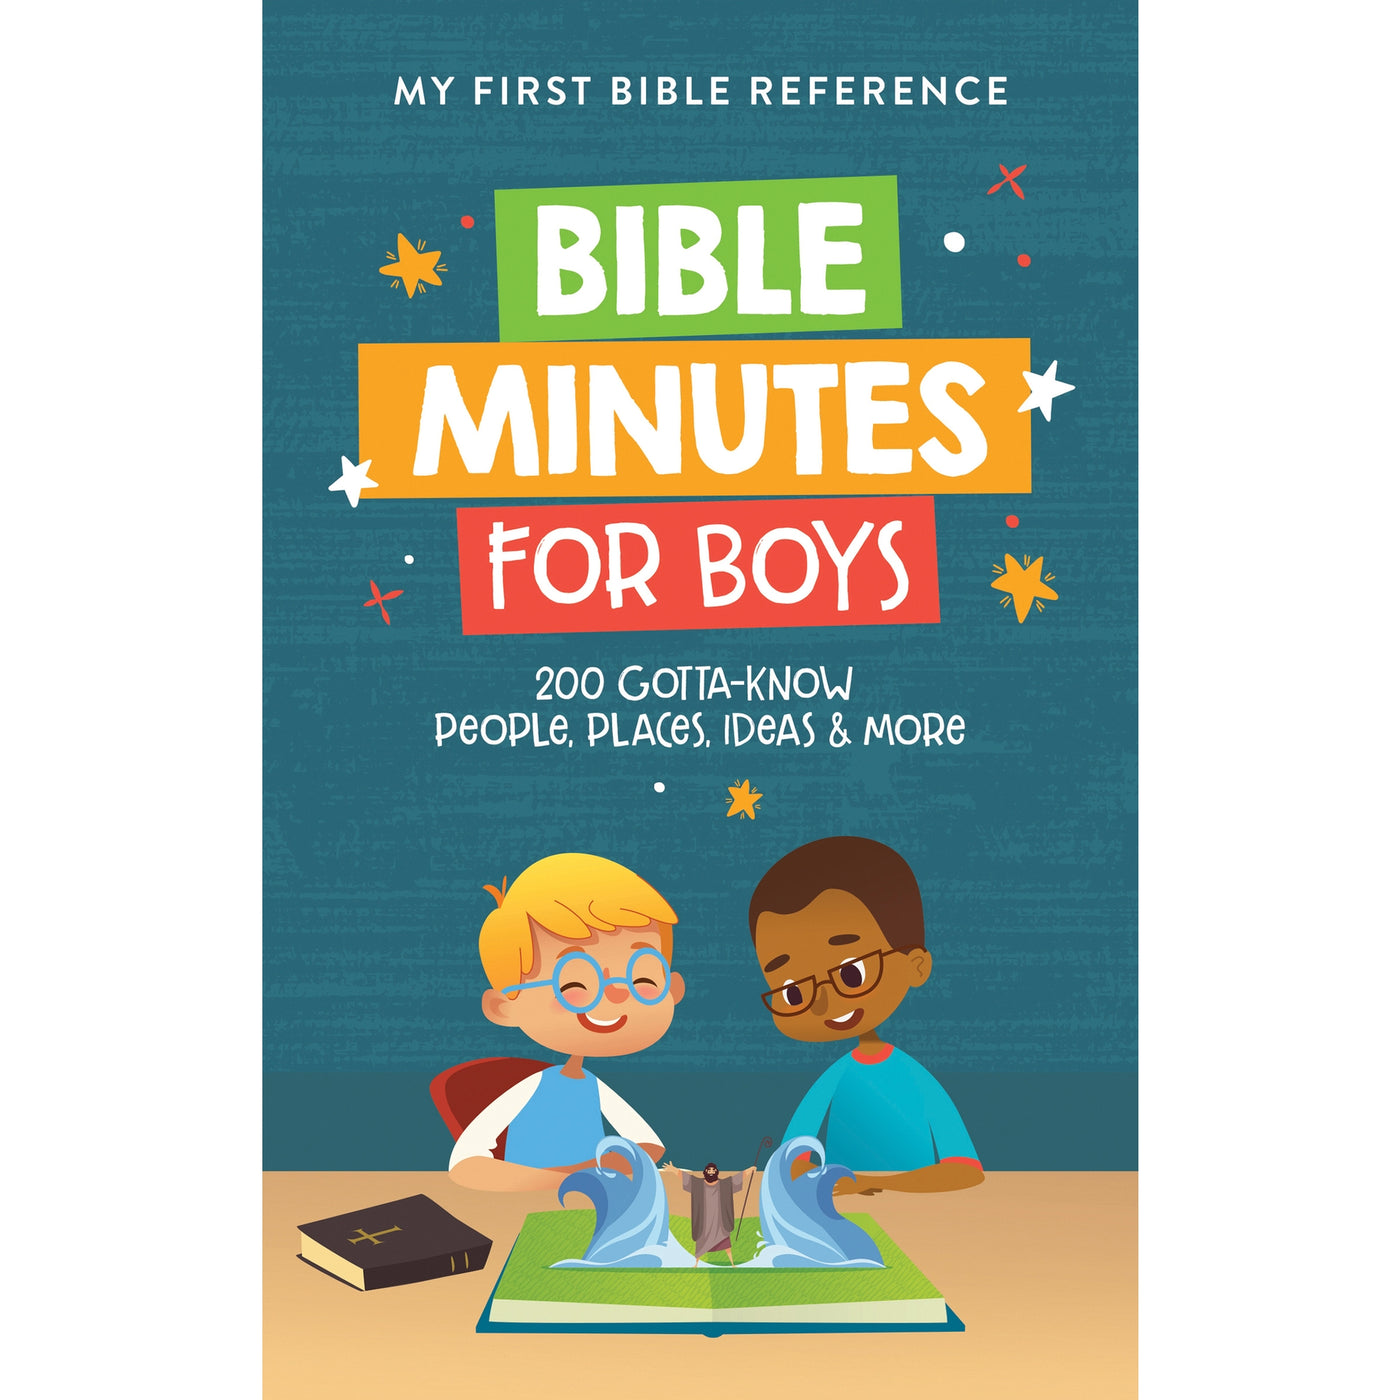 BIBLE MINUTE FOR BOYS